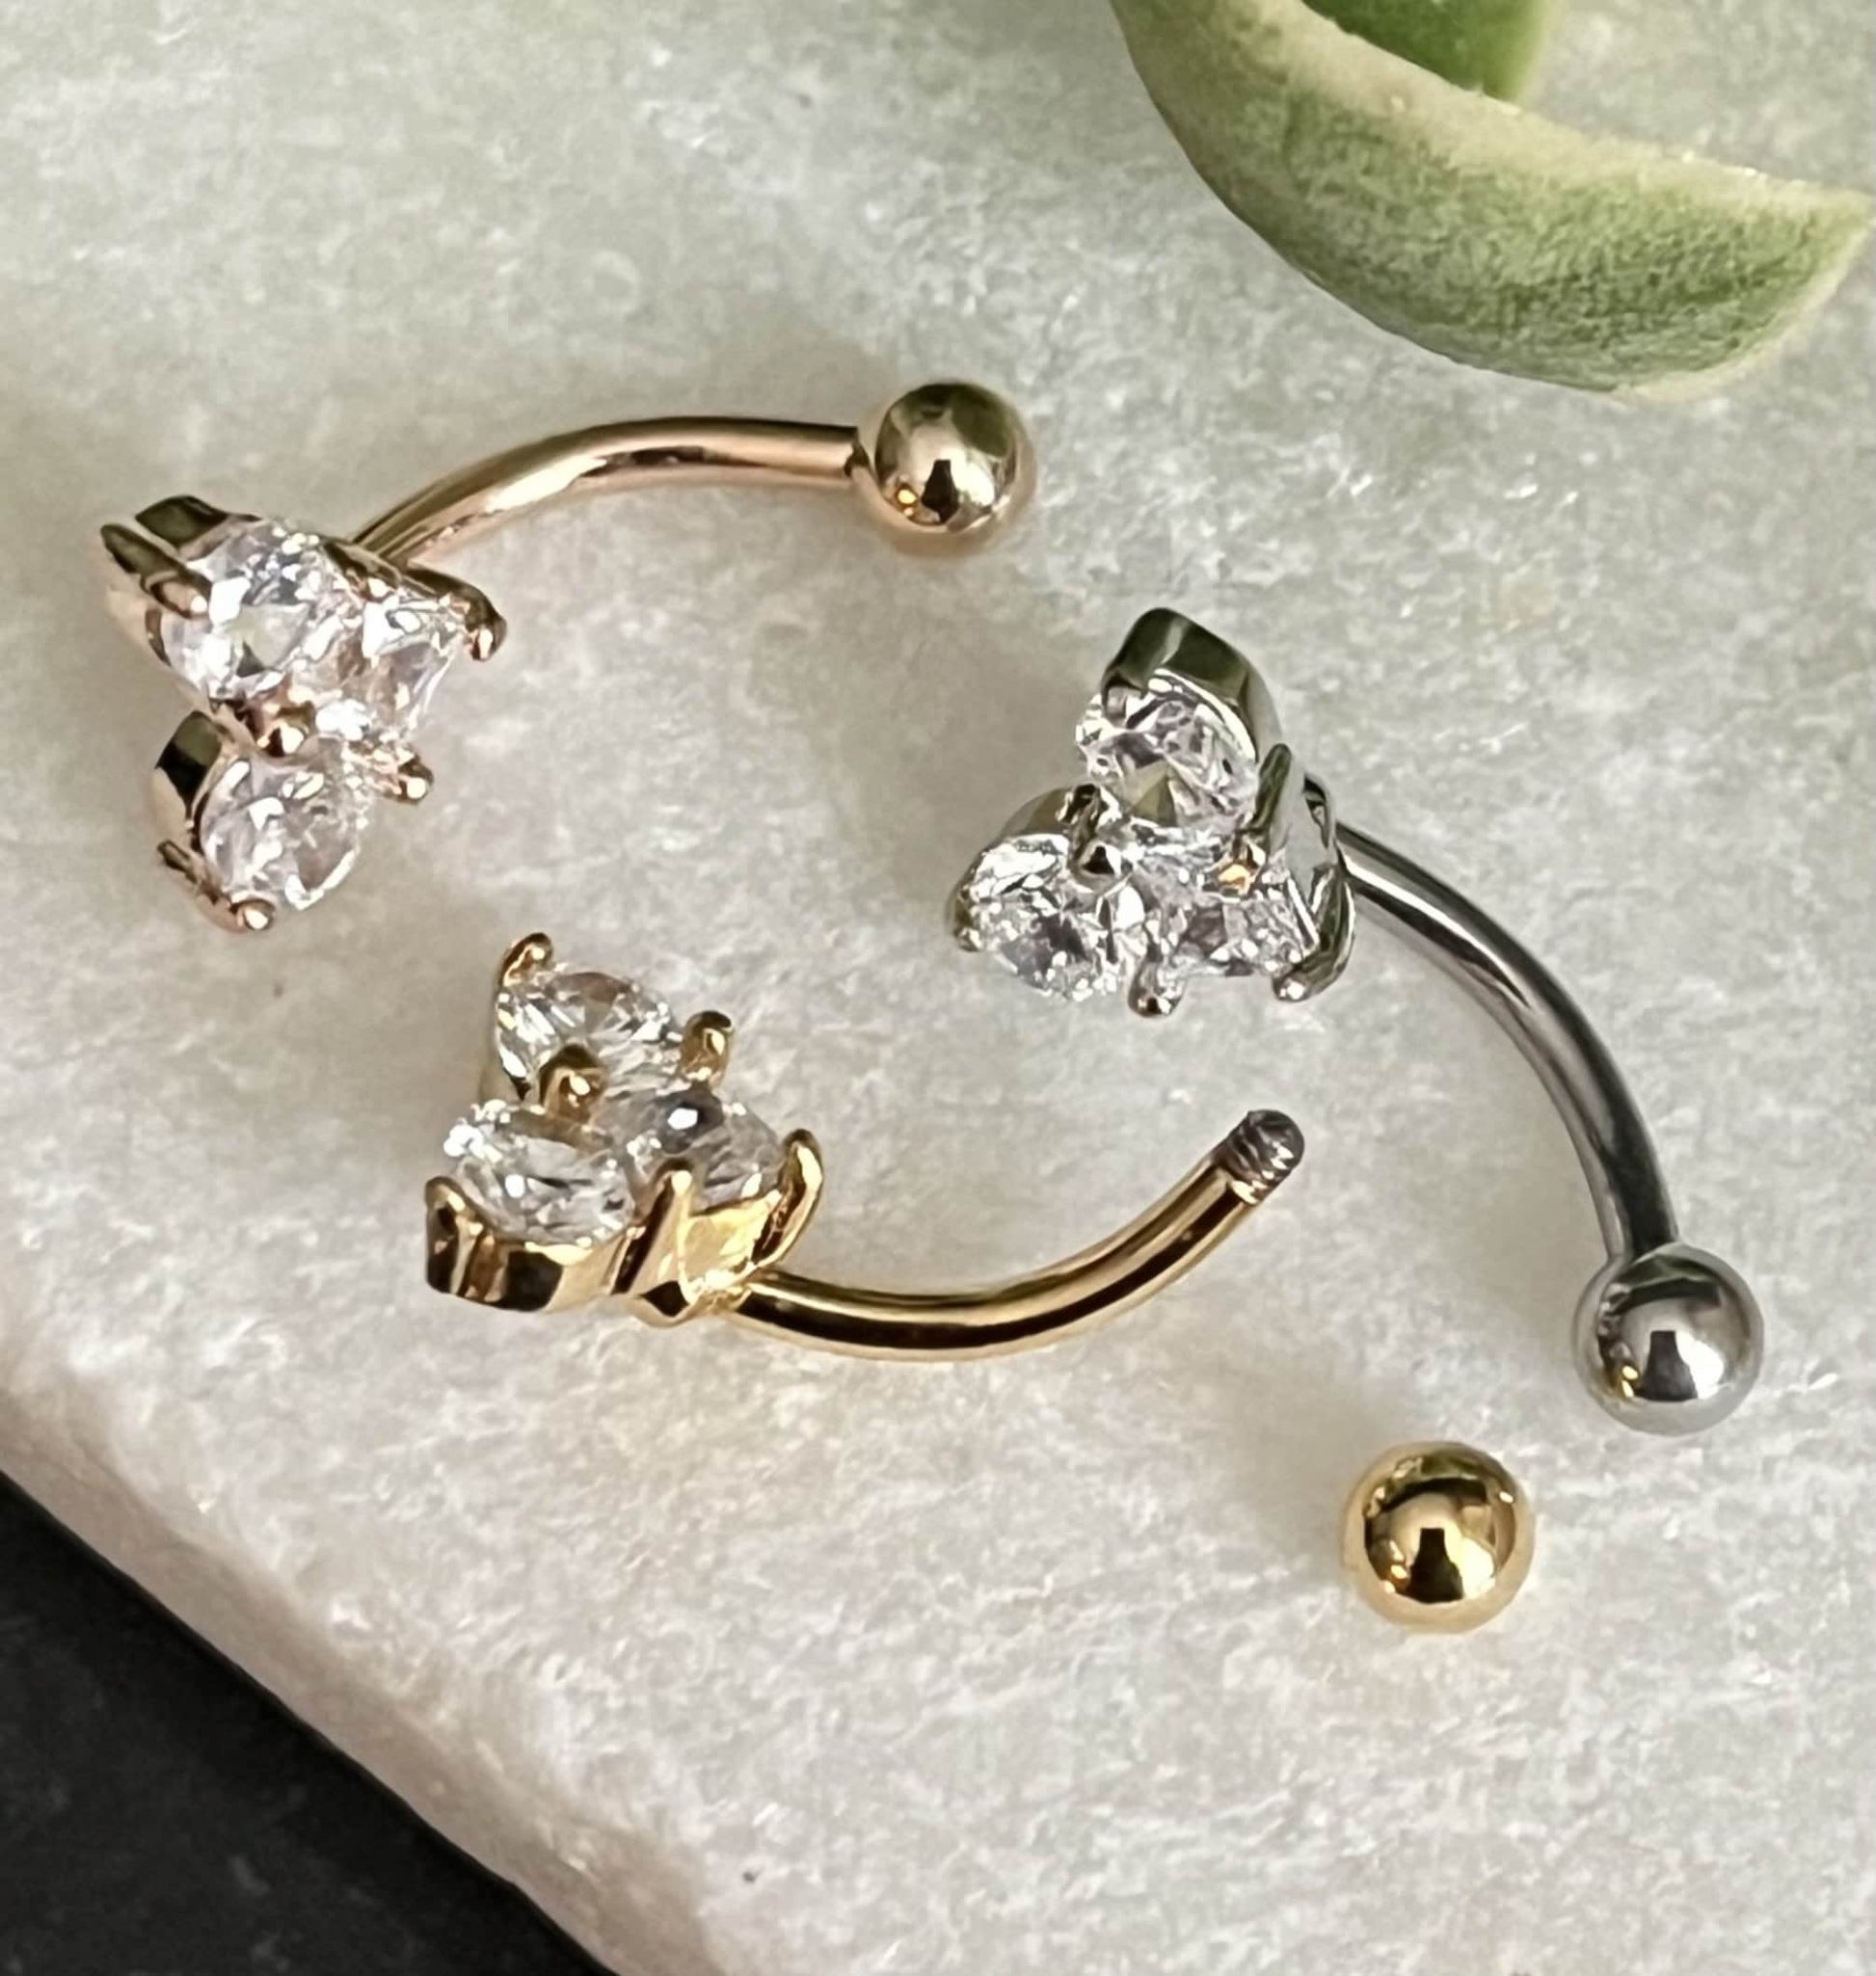 1 Brilliant Three CZ Gem Heart Eyebrow Ring with Curved Barbell - 16g (1.2mm), length 5/16" (8mm) - Silver, Gold or Rose Gold available!